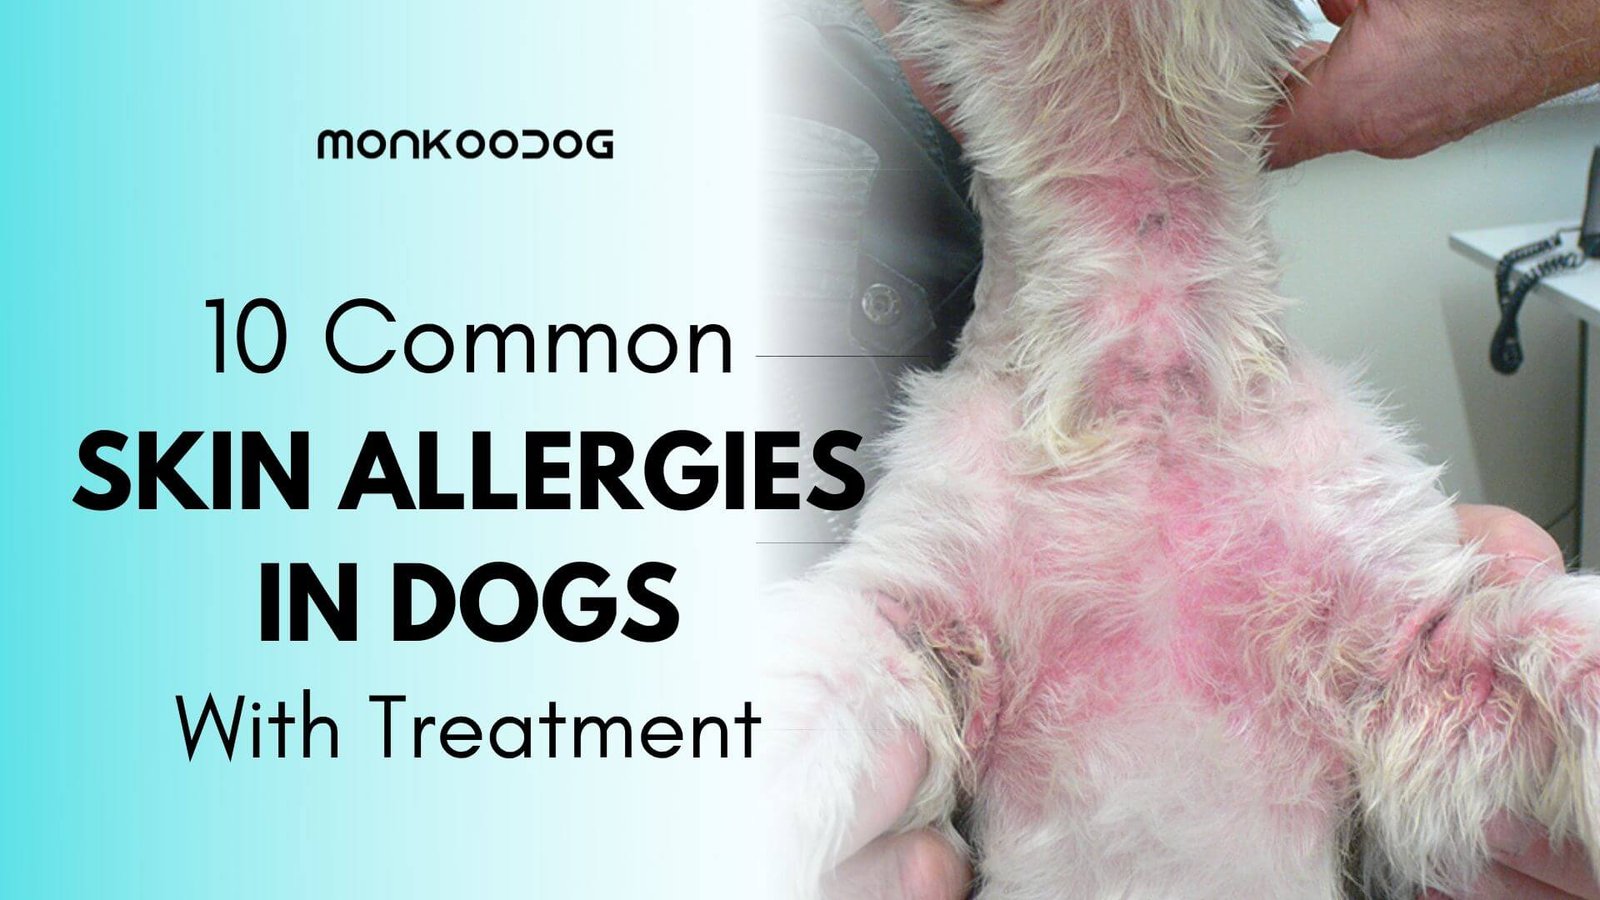 can you get infection from dogs